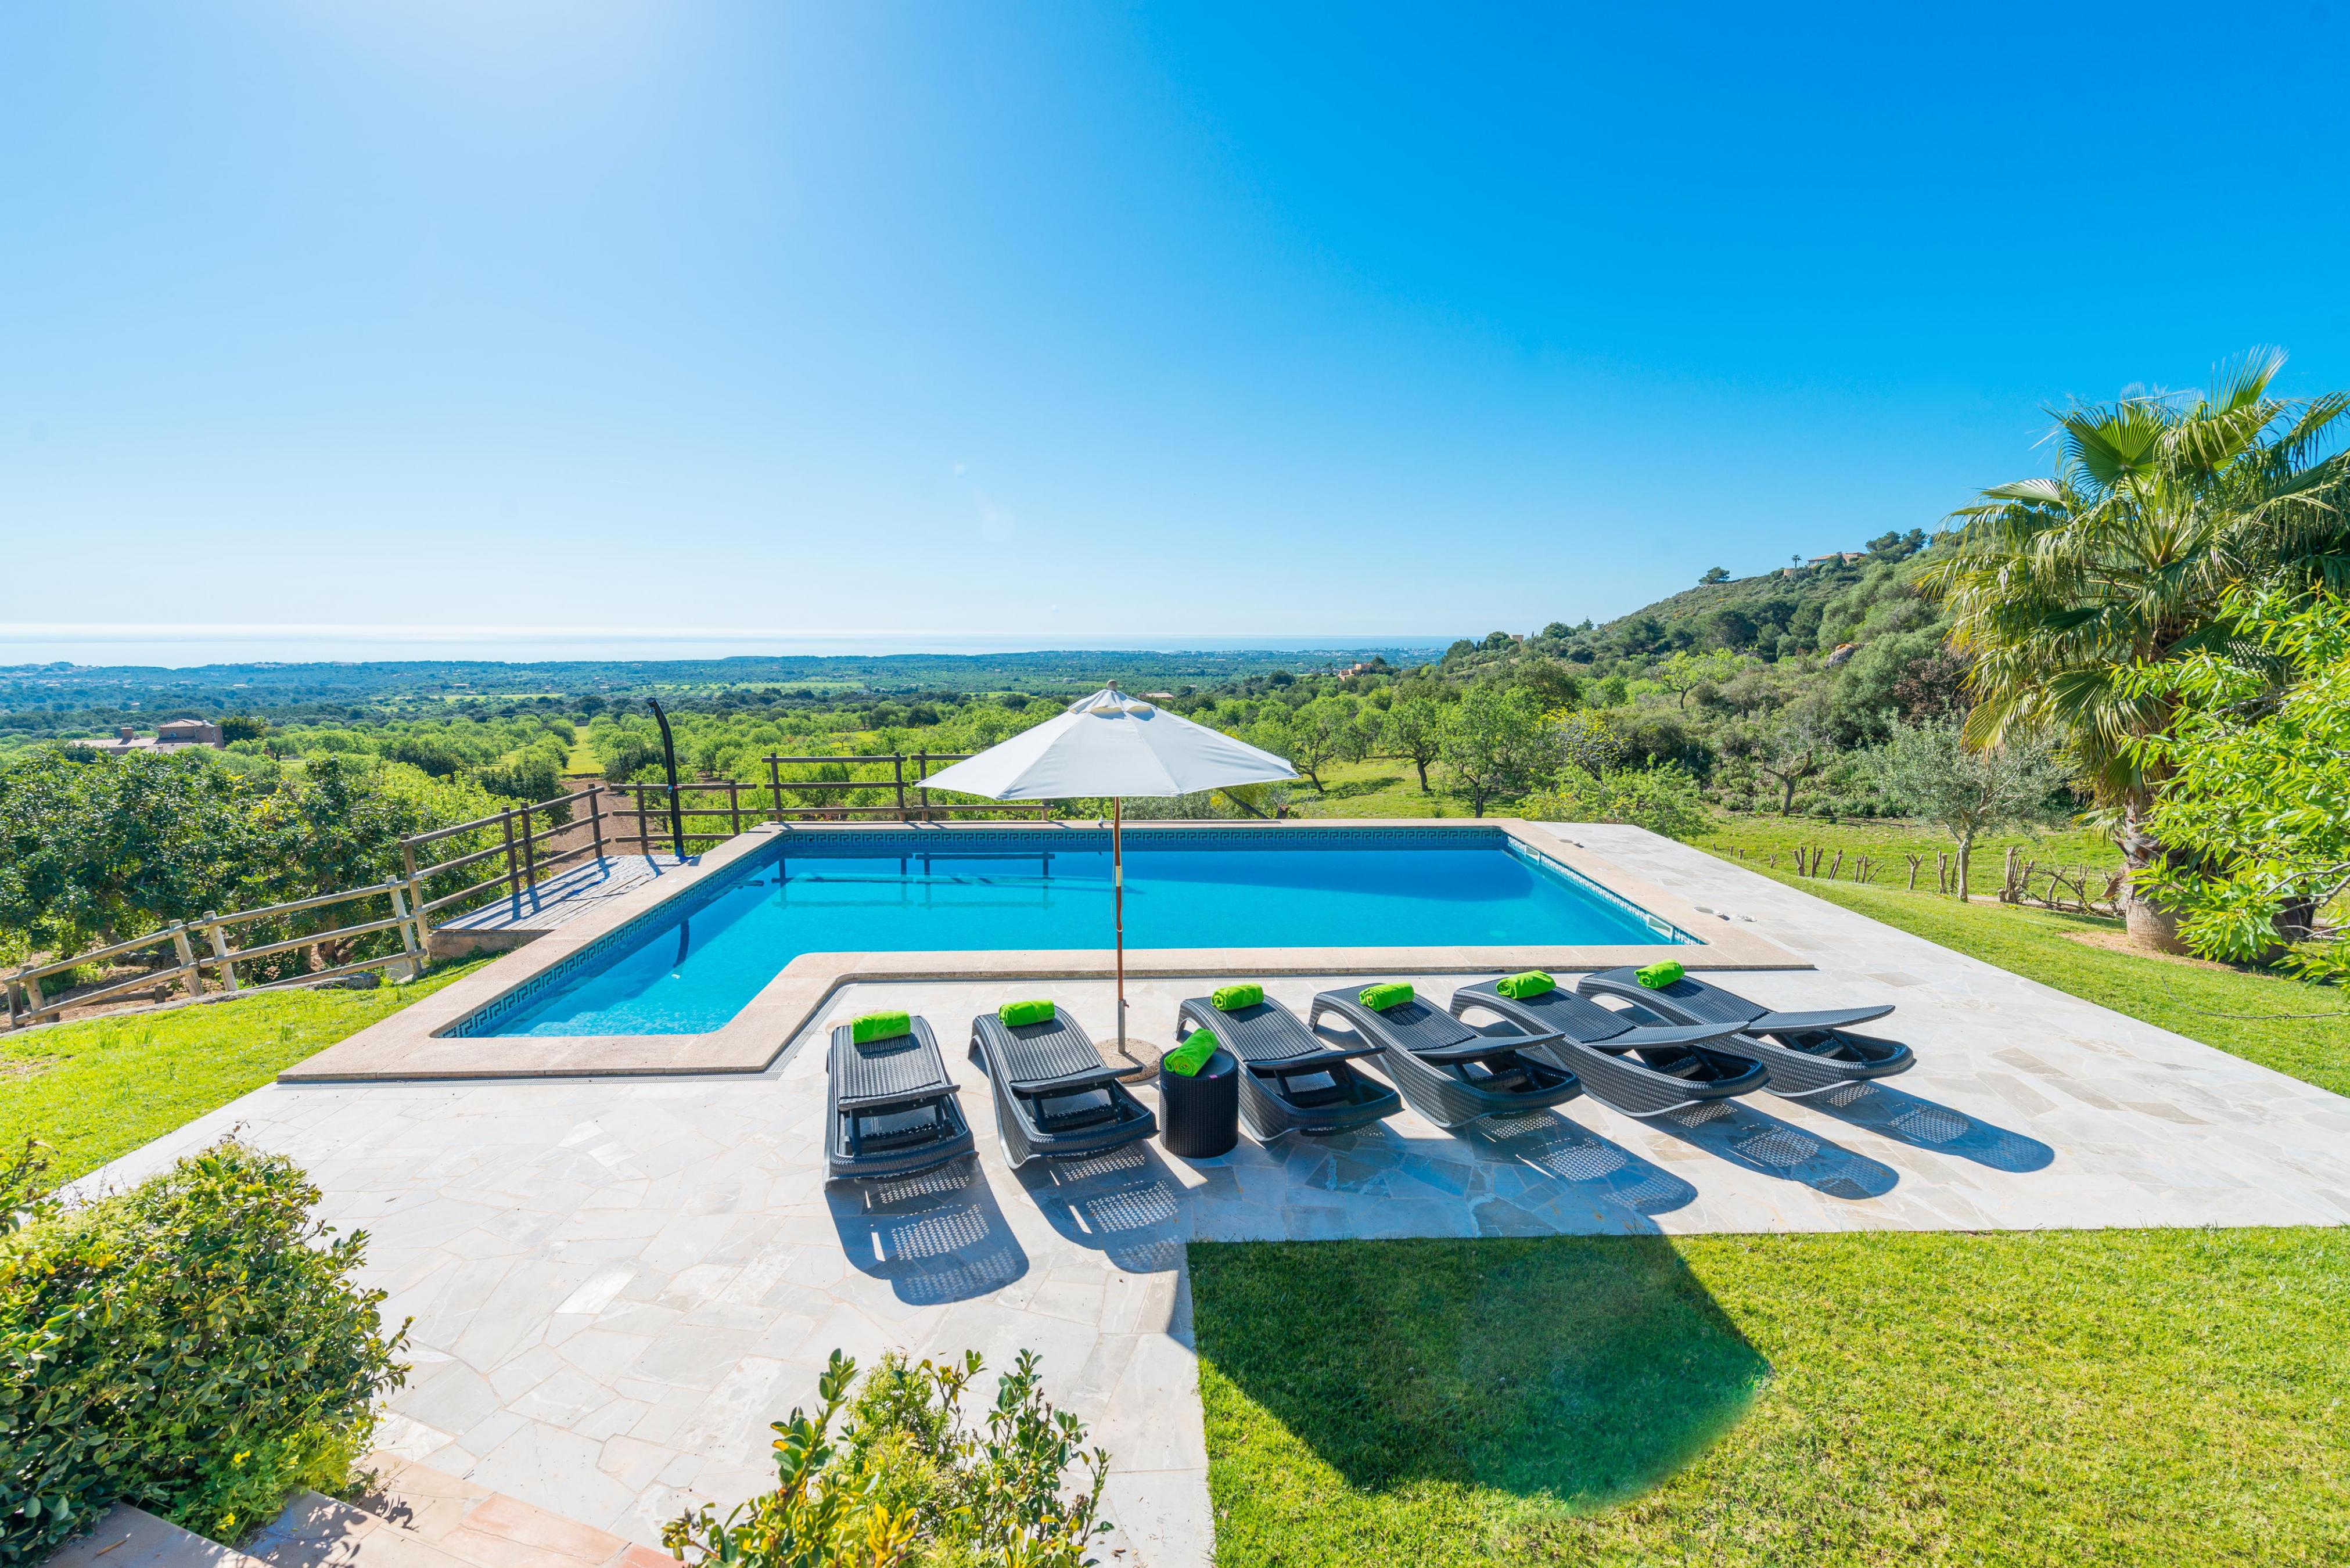 Property Image 1 - SA ROCA BLANCA - Amazing villa with private pool and breathtaking views. Free WiFi